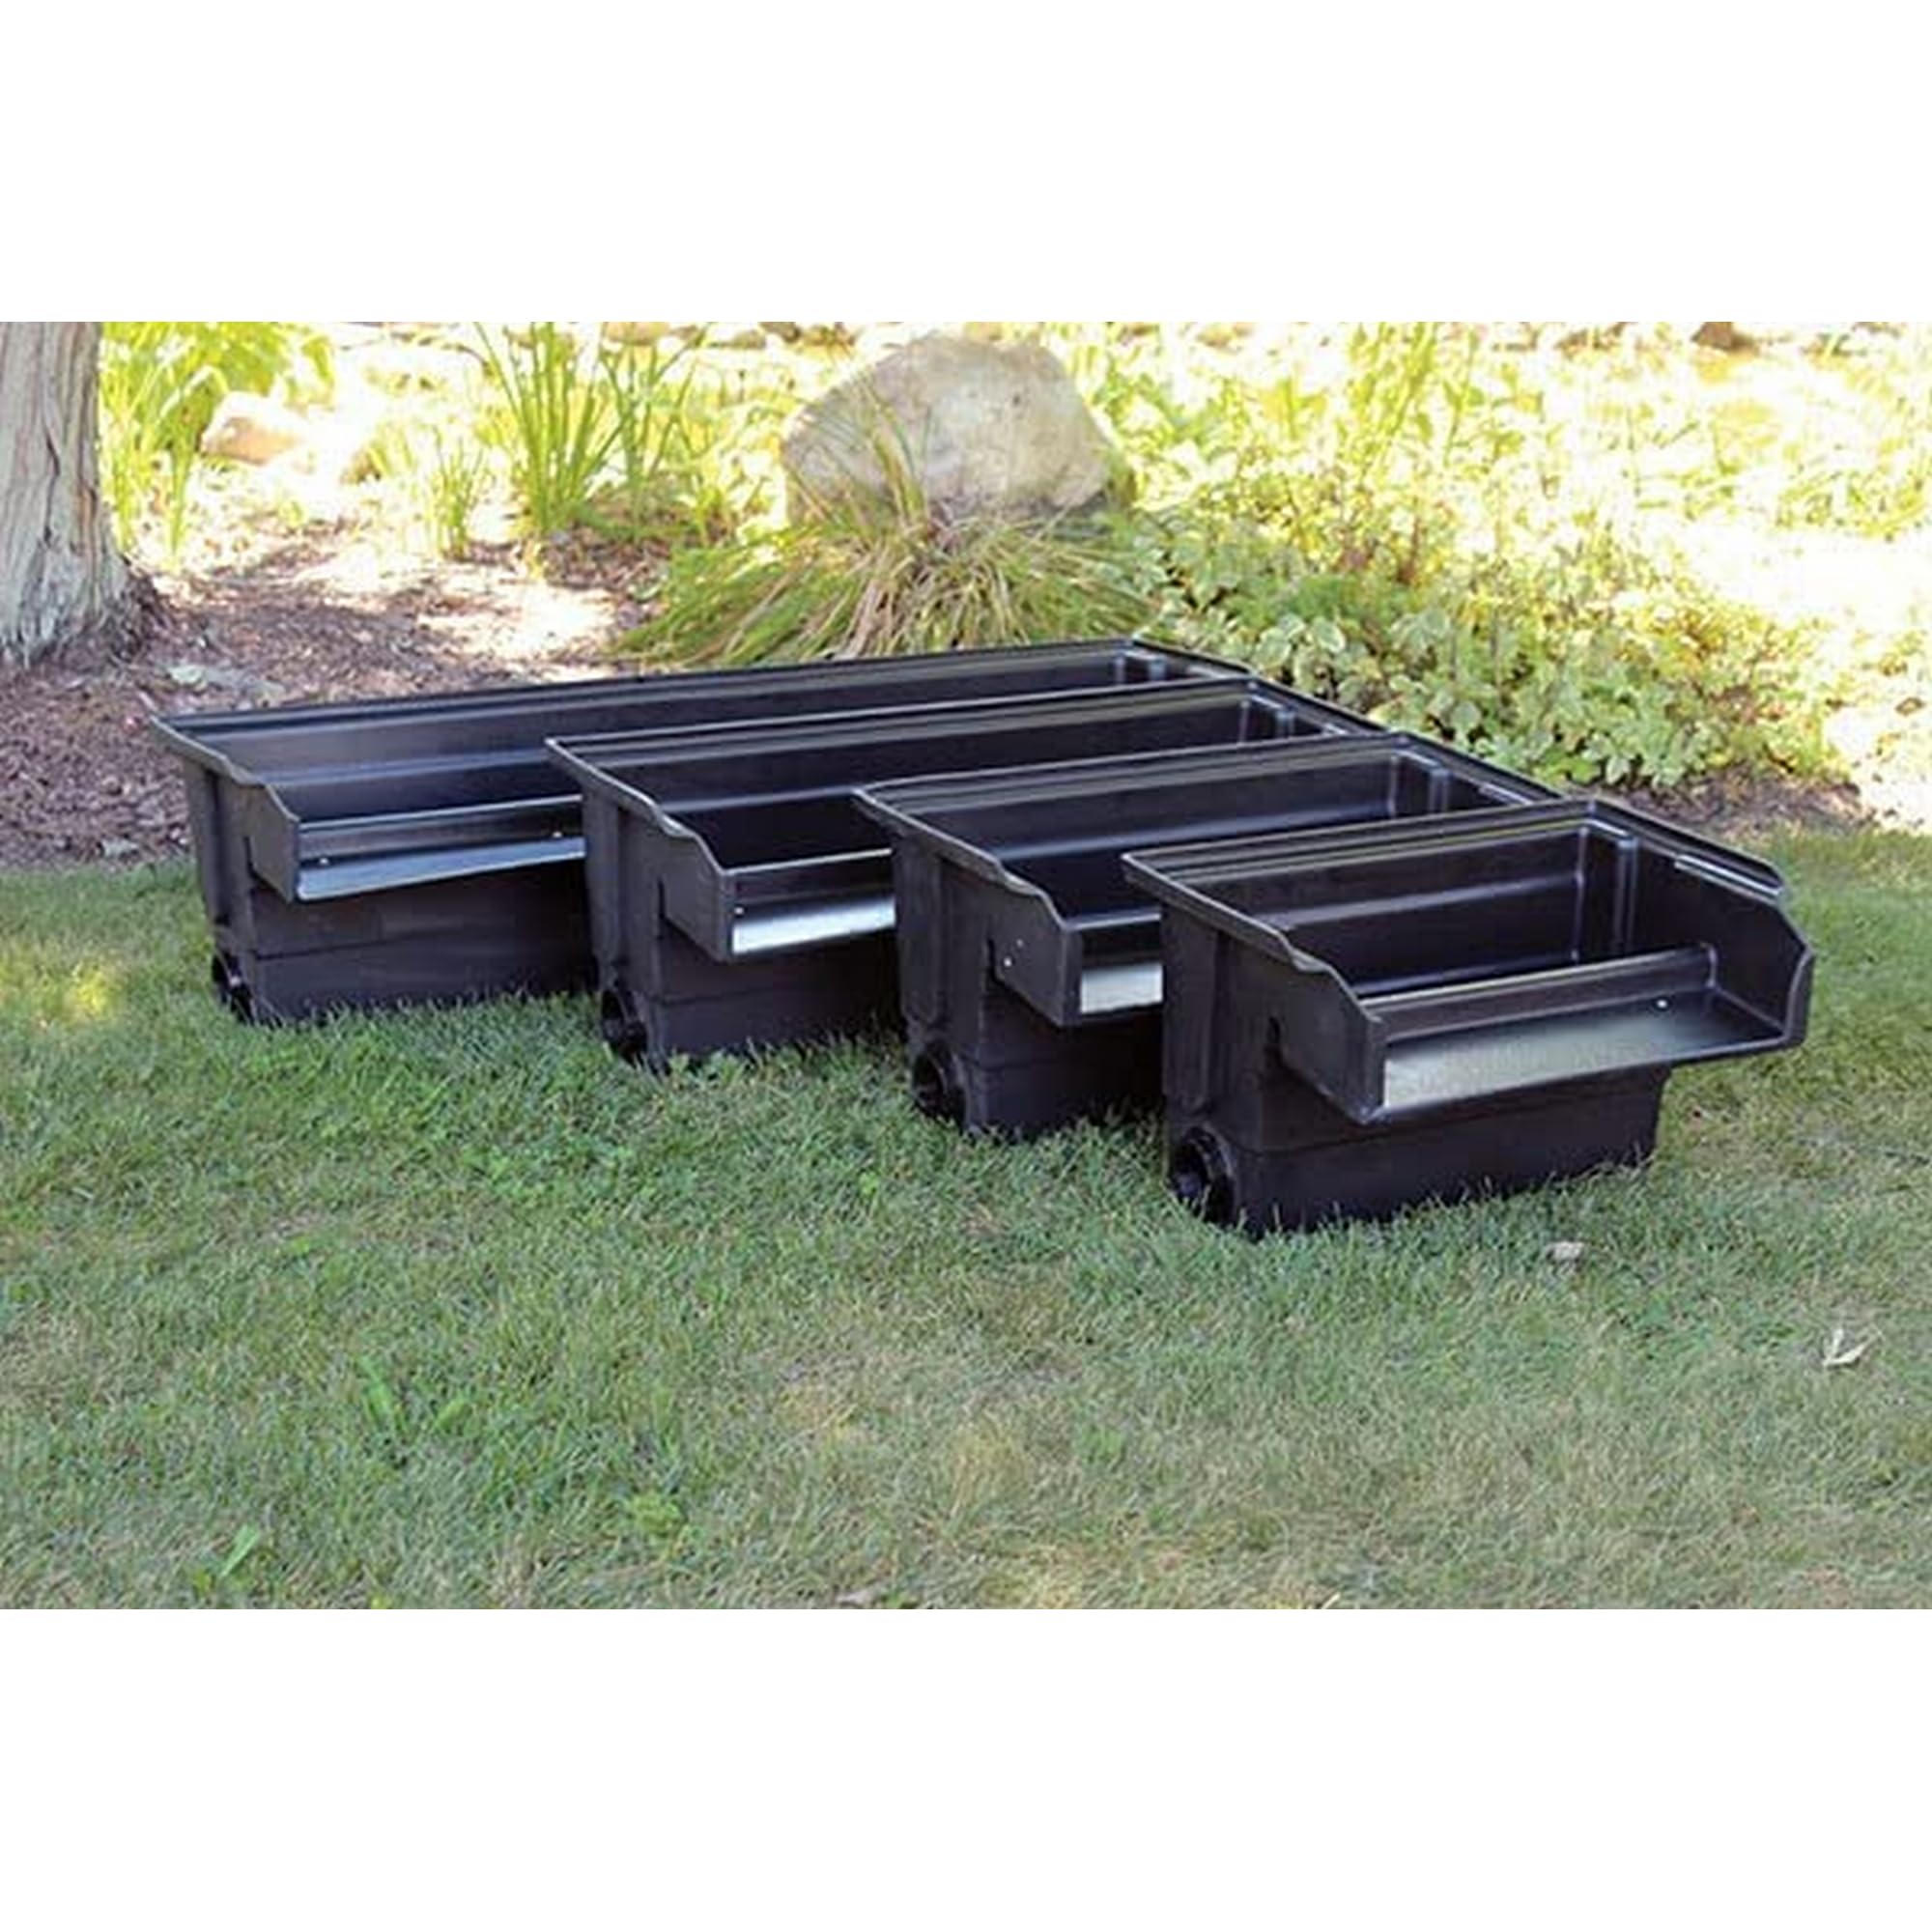 EasyPro Pond Products CF18E Eco-Series 18” Waterfall Spillway is Ideal for Just-A-Falls Water Features. Connect Liner Without Tools. 2-2” Installed Spinweld Inlets. Up to 3400 to 4500 GPH Flow